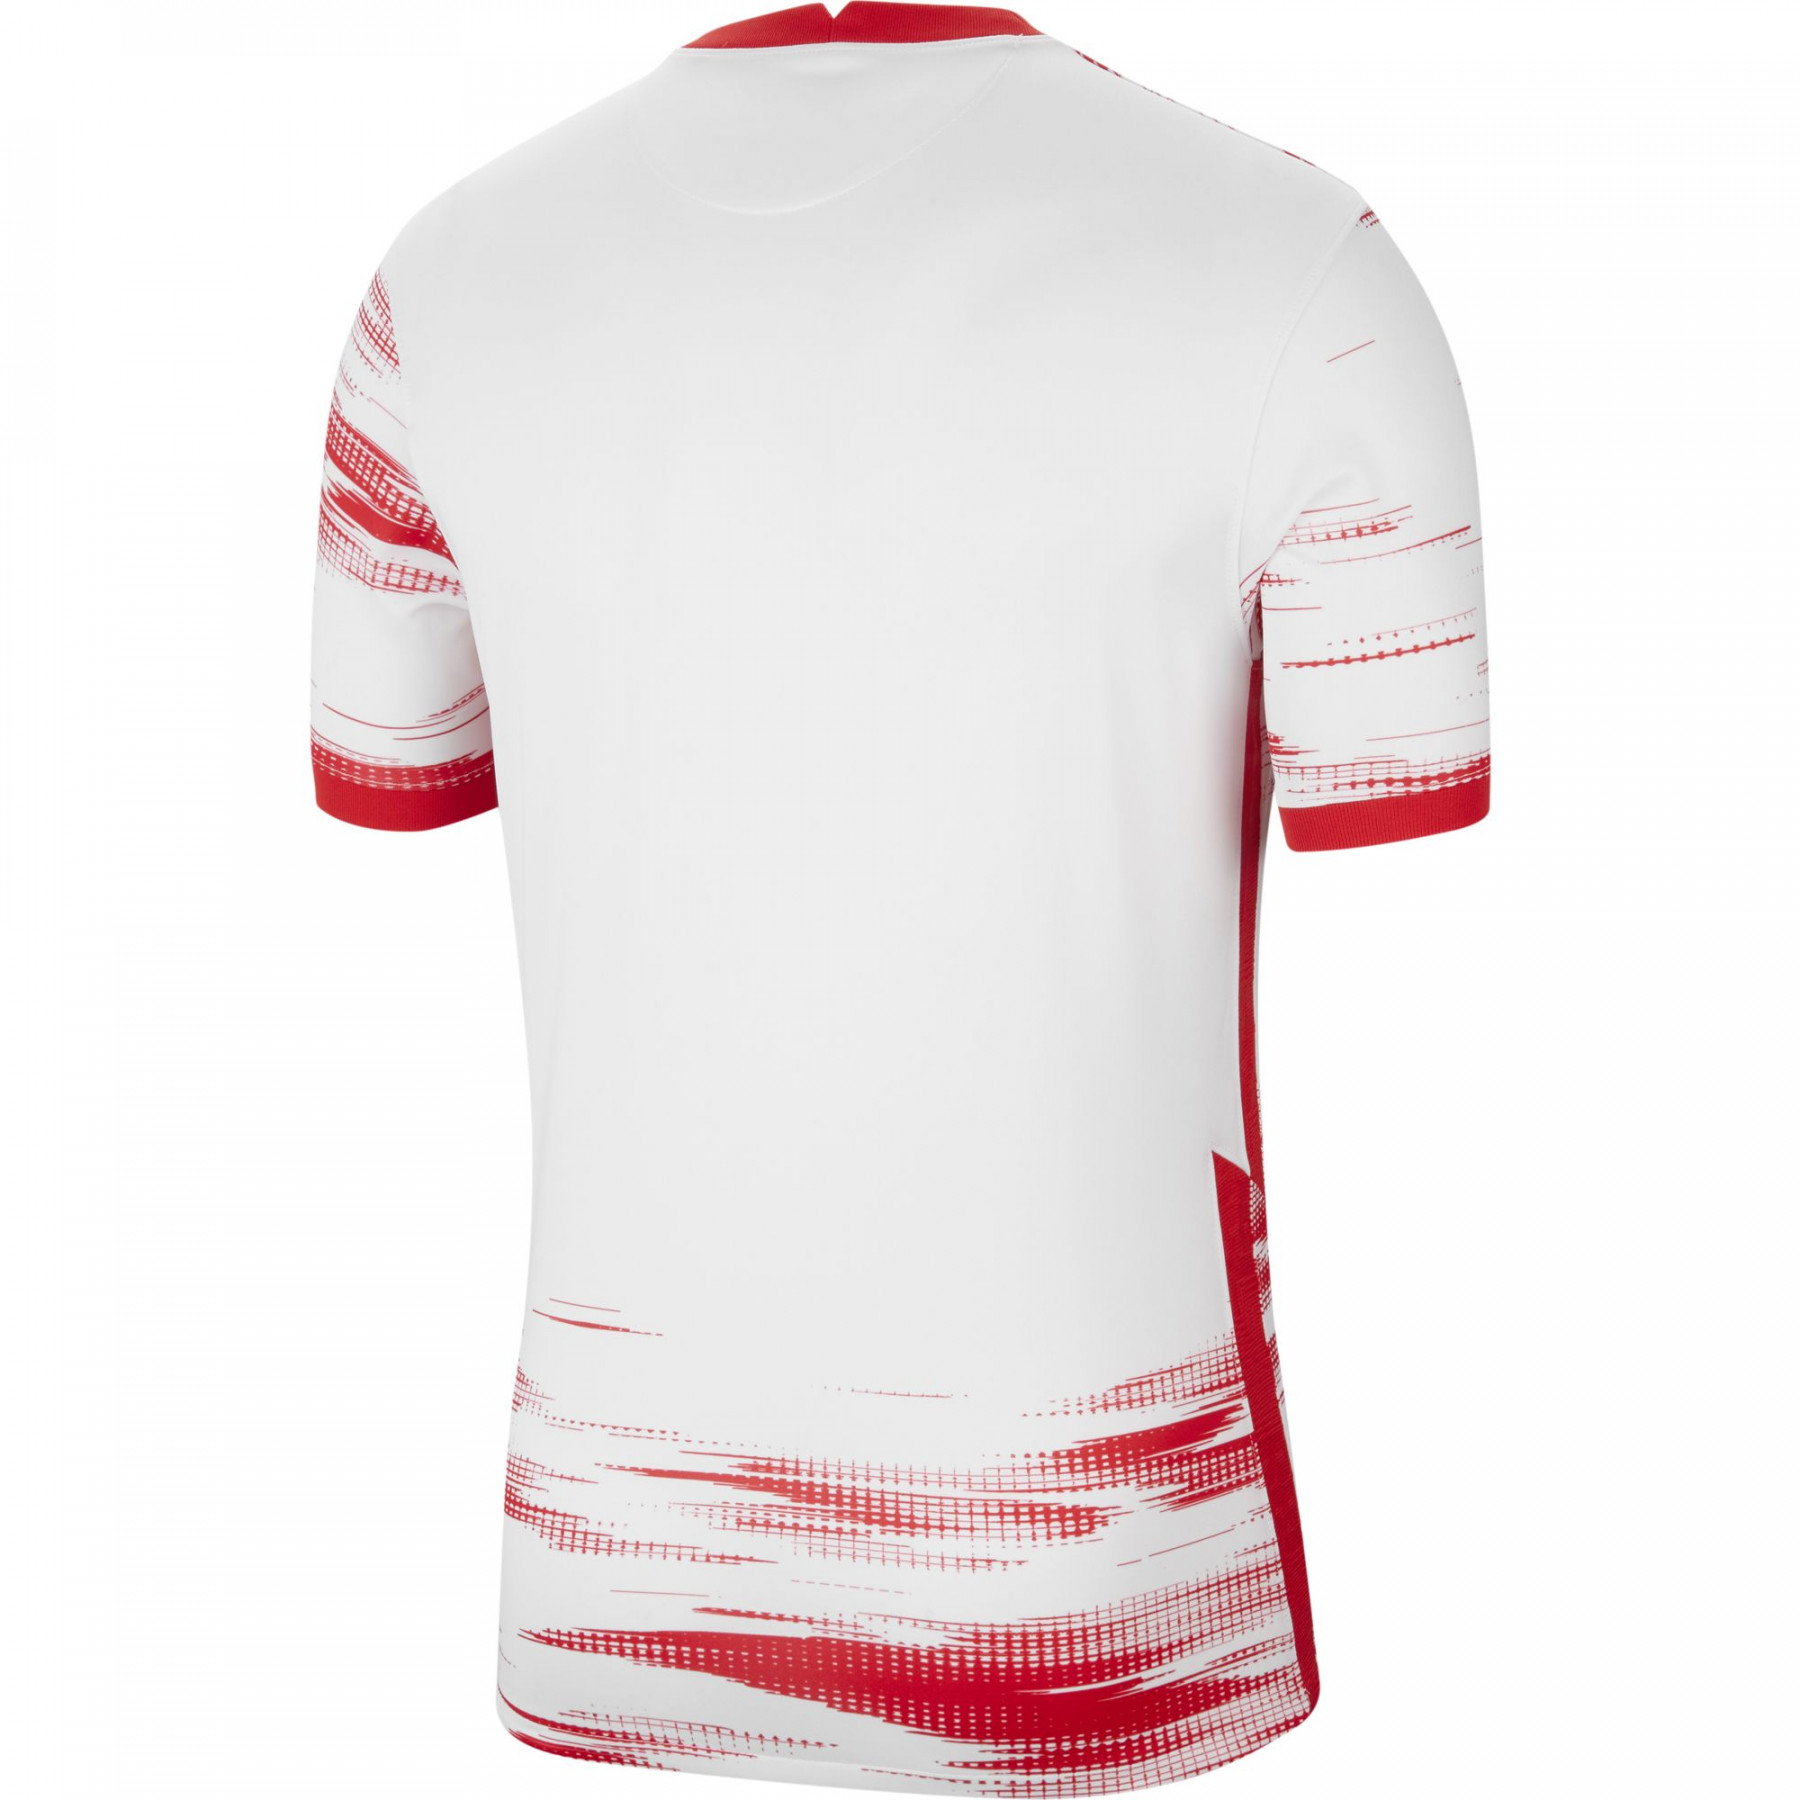 Home jersey child RB Leipzig 2021/22